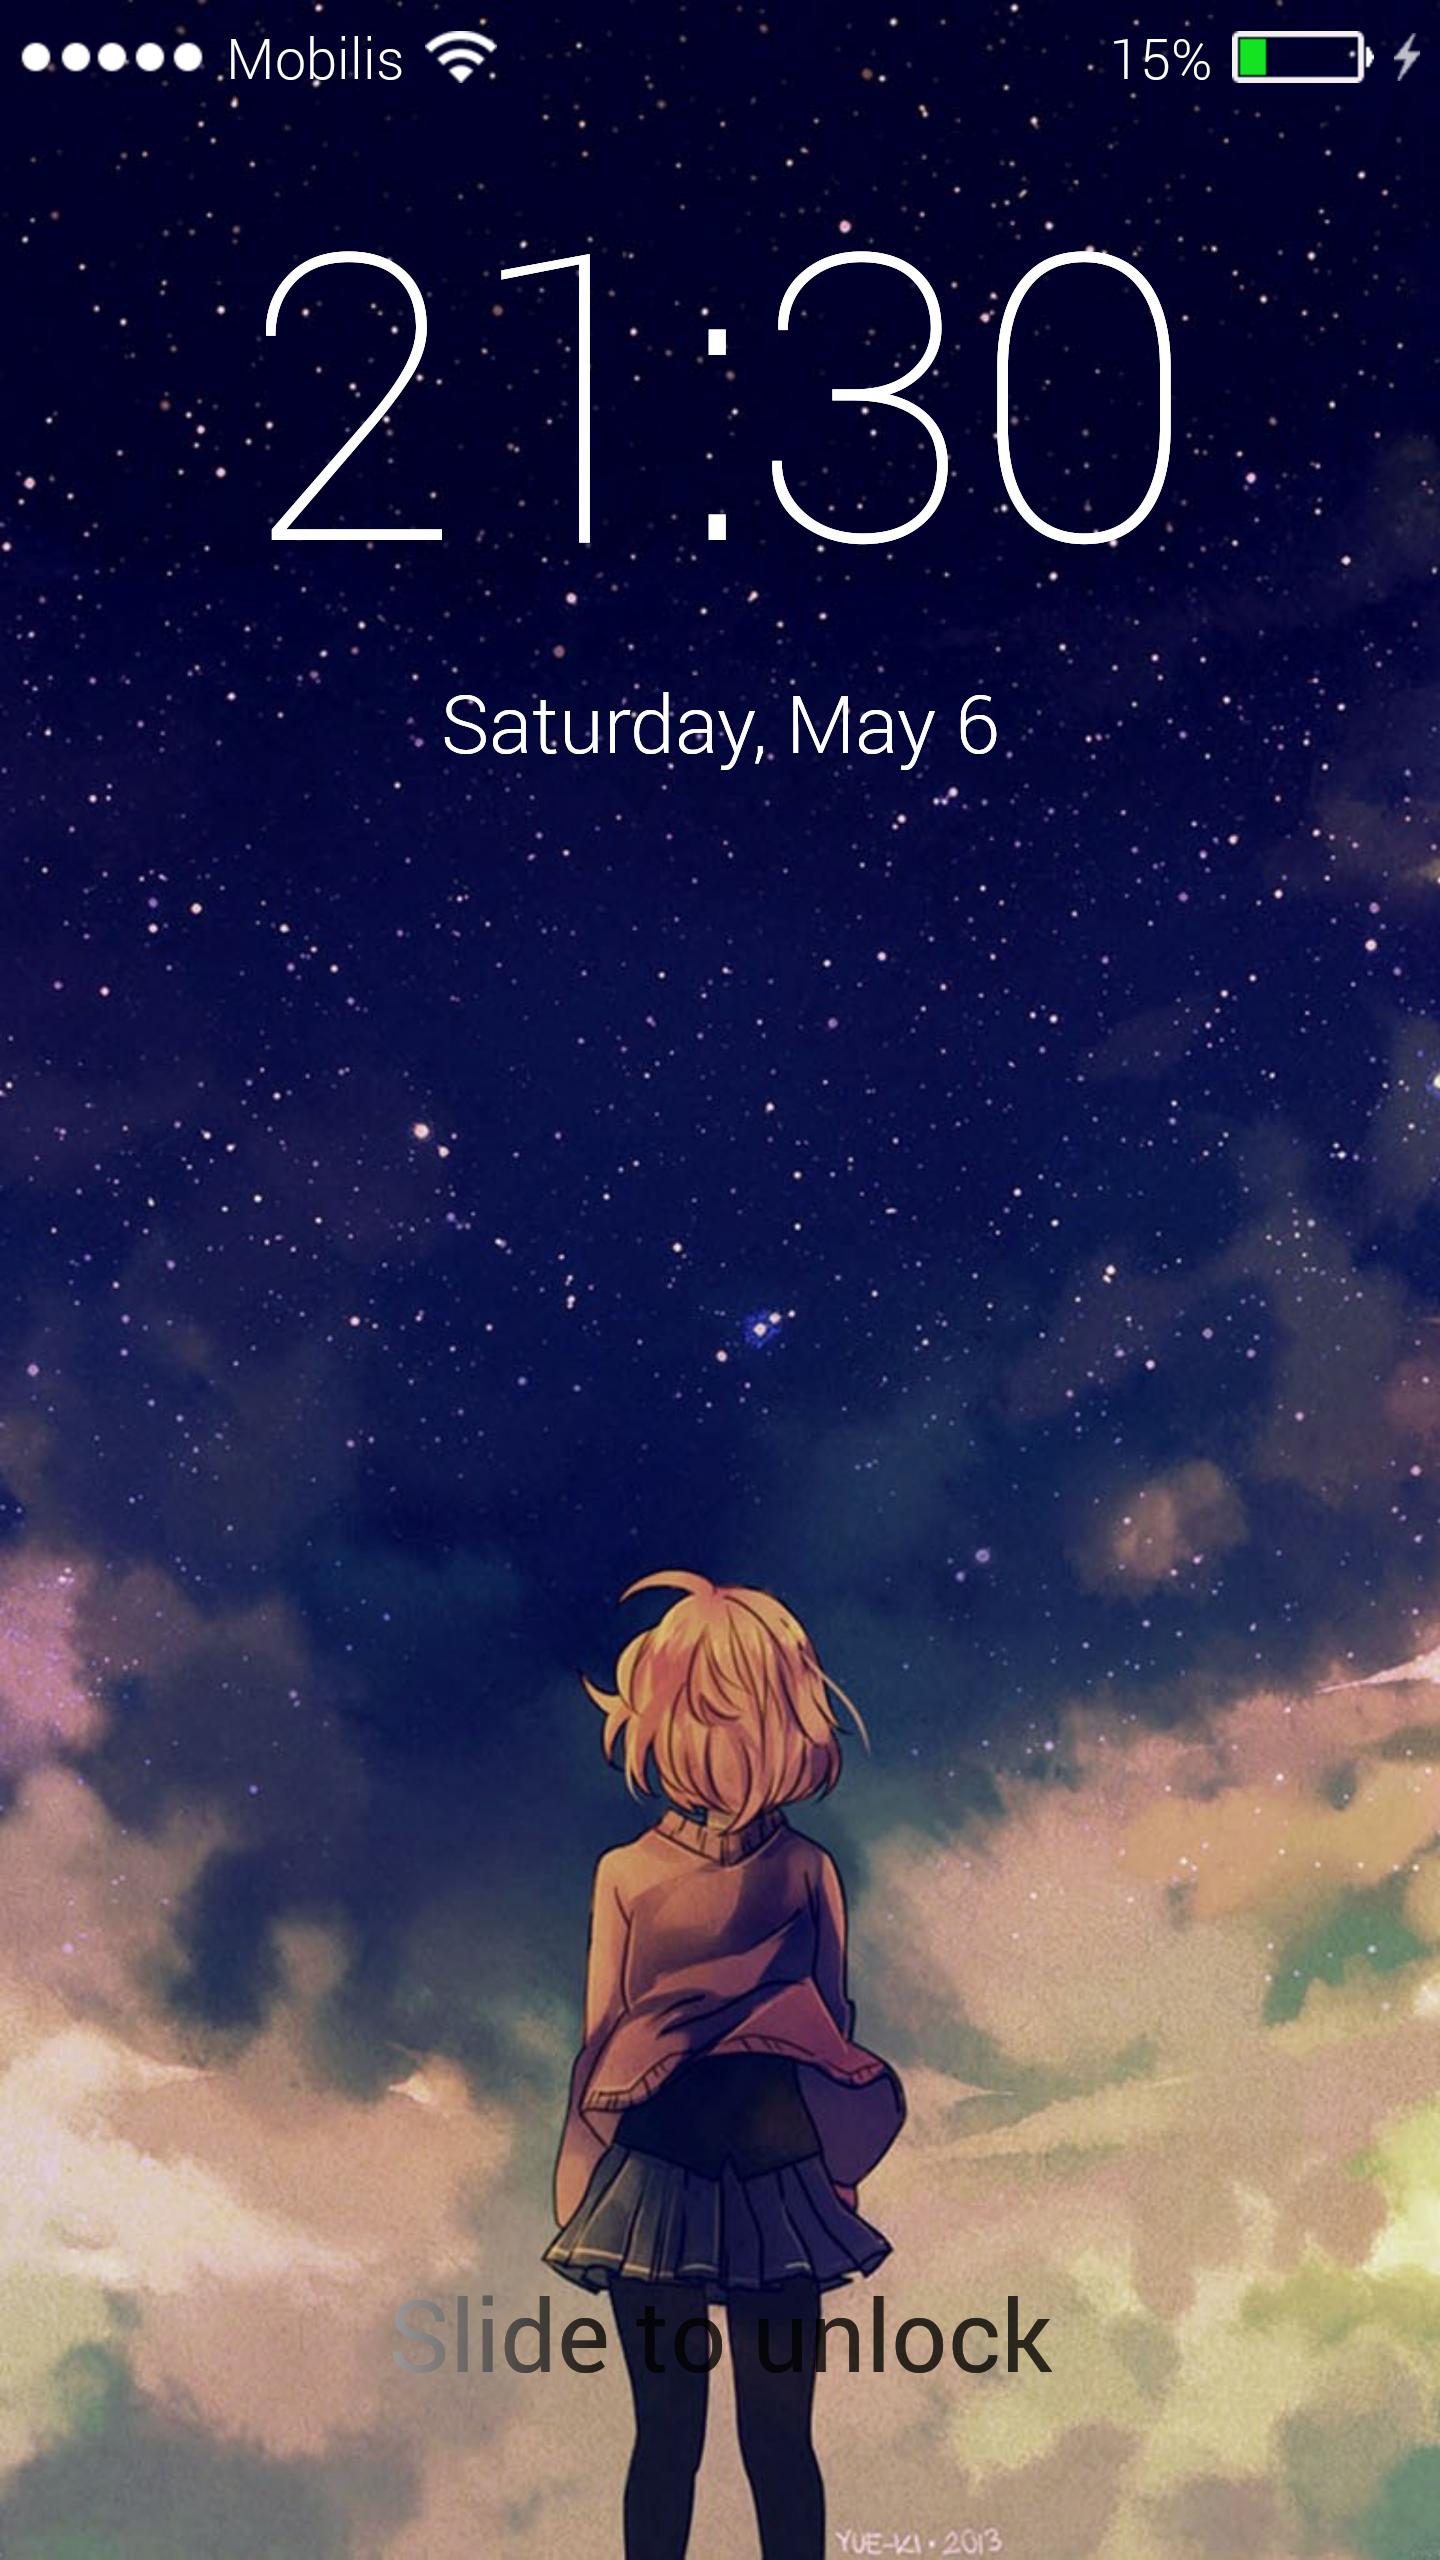 anime lock screen wallpaper for Android - APK Download